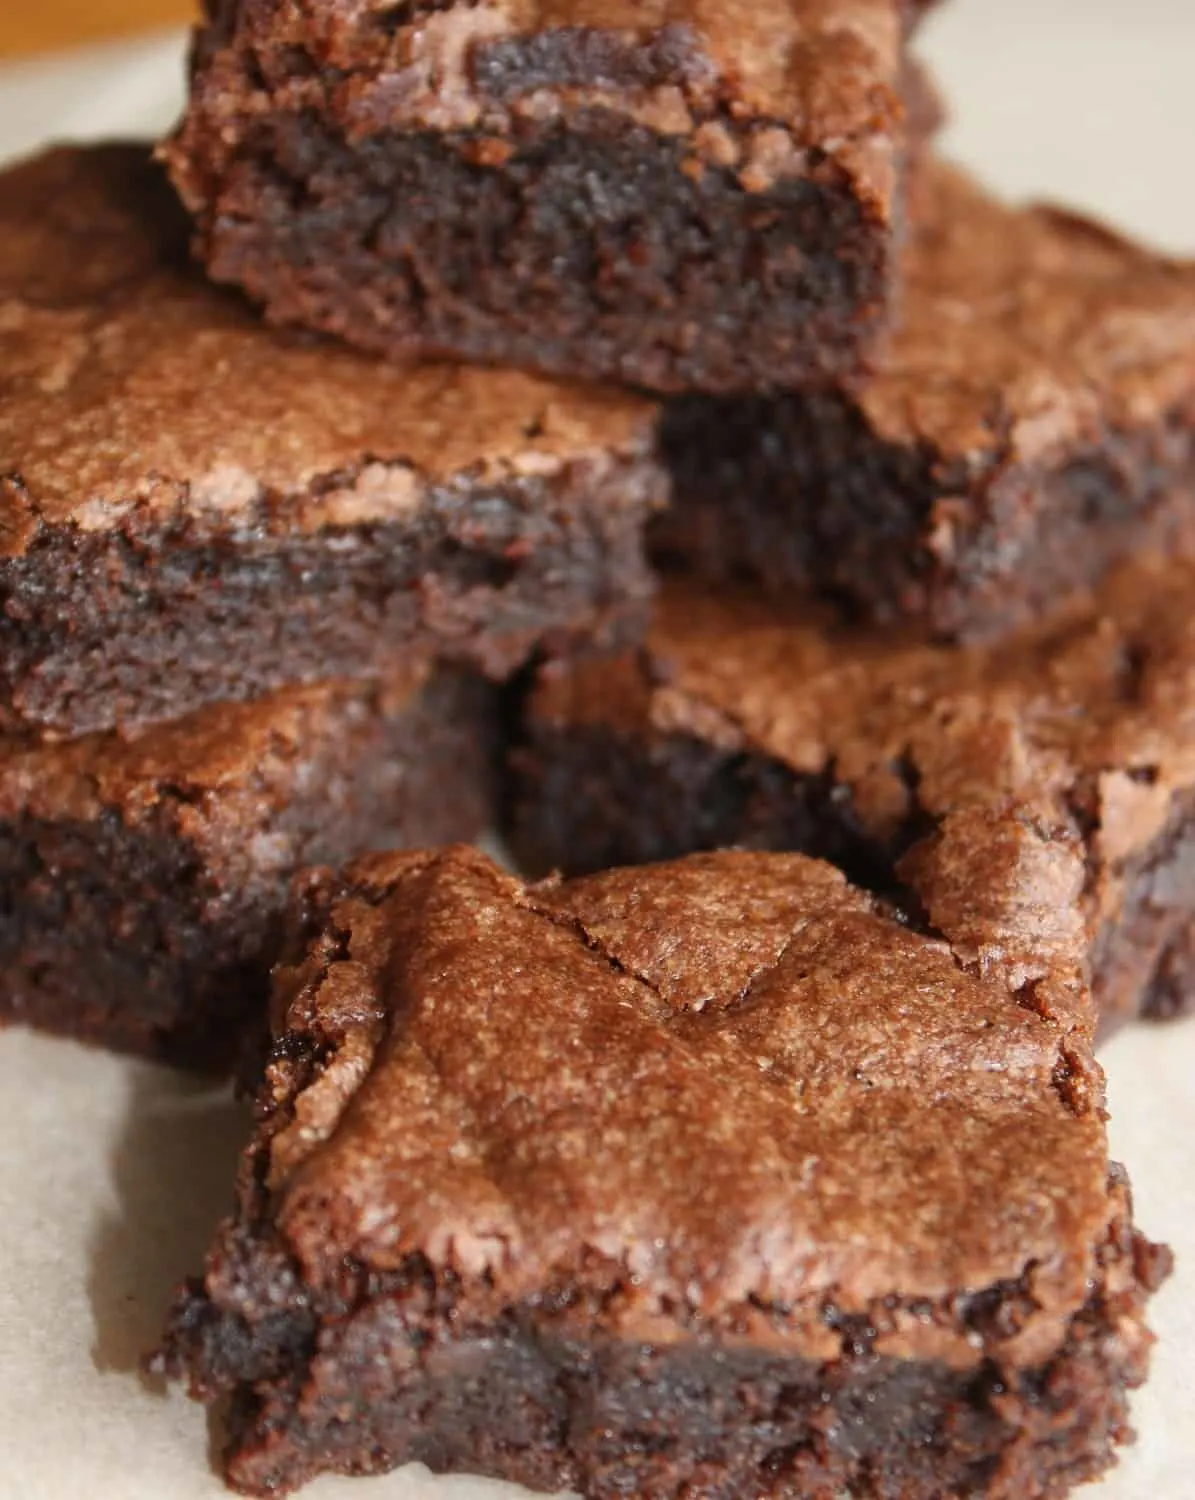 These chewy chocolate brownies are a decadent treat if you have been avoiding desserts due to a gluten intolerance.